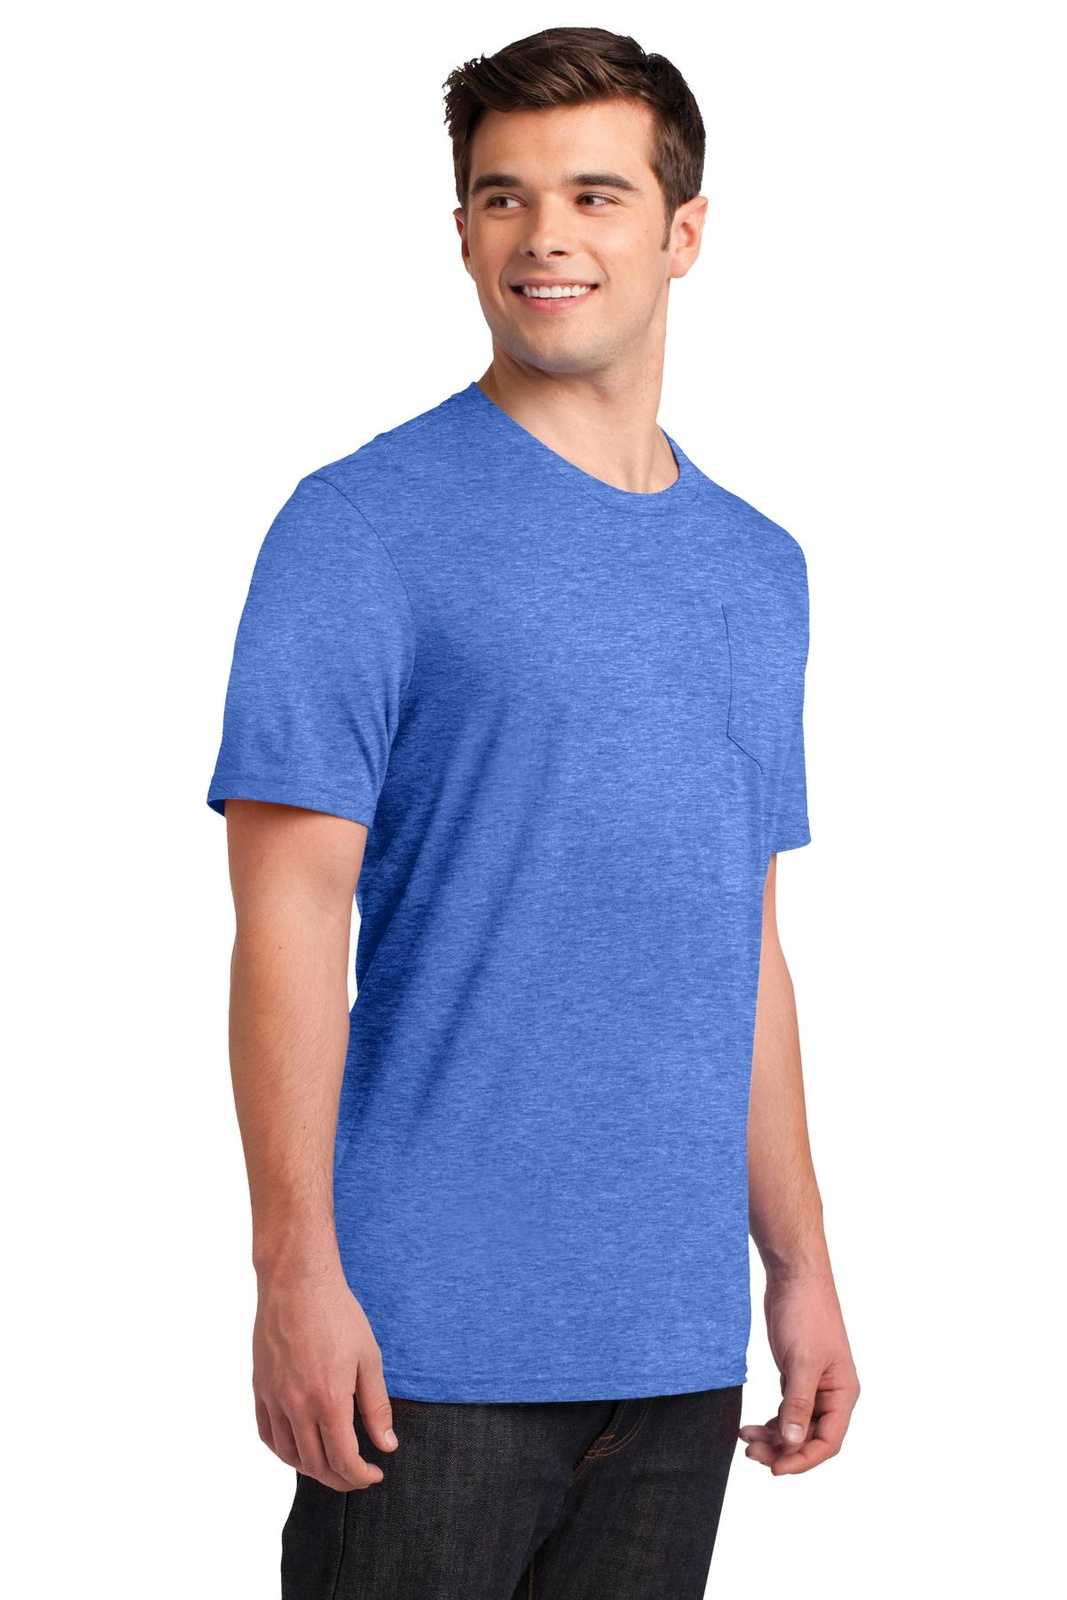 District DT6000P Very Important Tee with Pocket - Heathered Royal - HIT a Double - 4